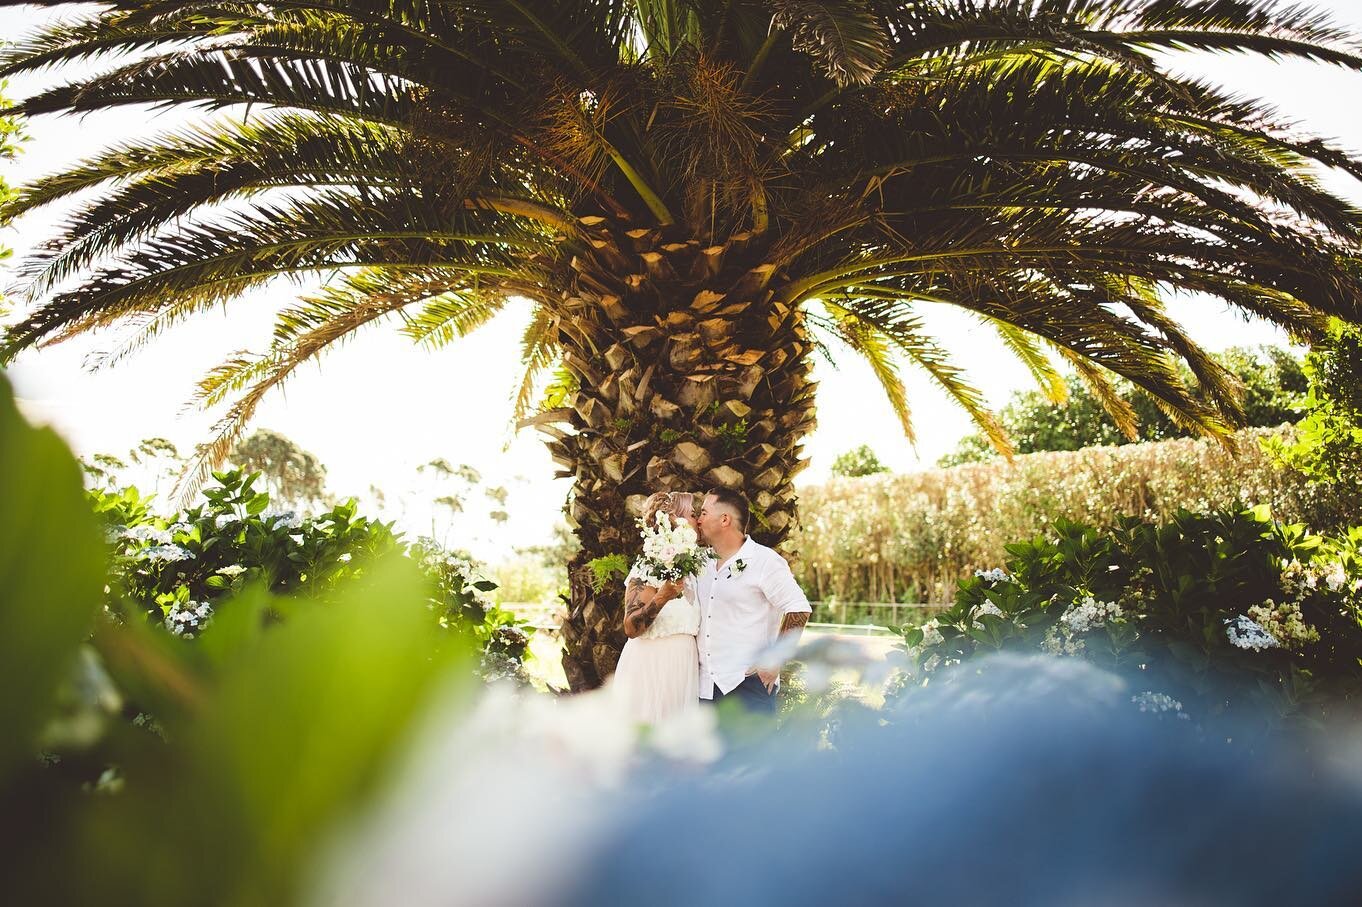 Stunning day with Adrianne &amp; Lee at The Bungalow last weekend! They had a heartfelt ceremony followed by a laidback reception. Was so good photographing their wedding, here are some of my favourites - full sneak peek on Facebook! 
~
@thebungaloww